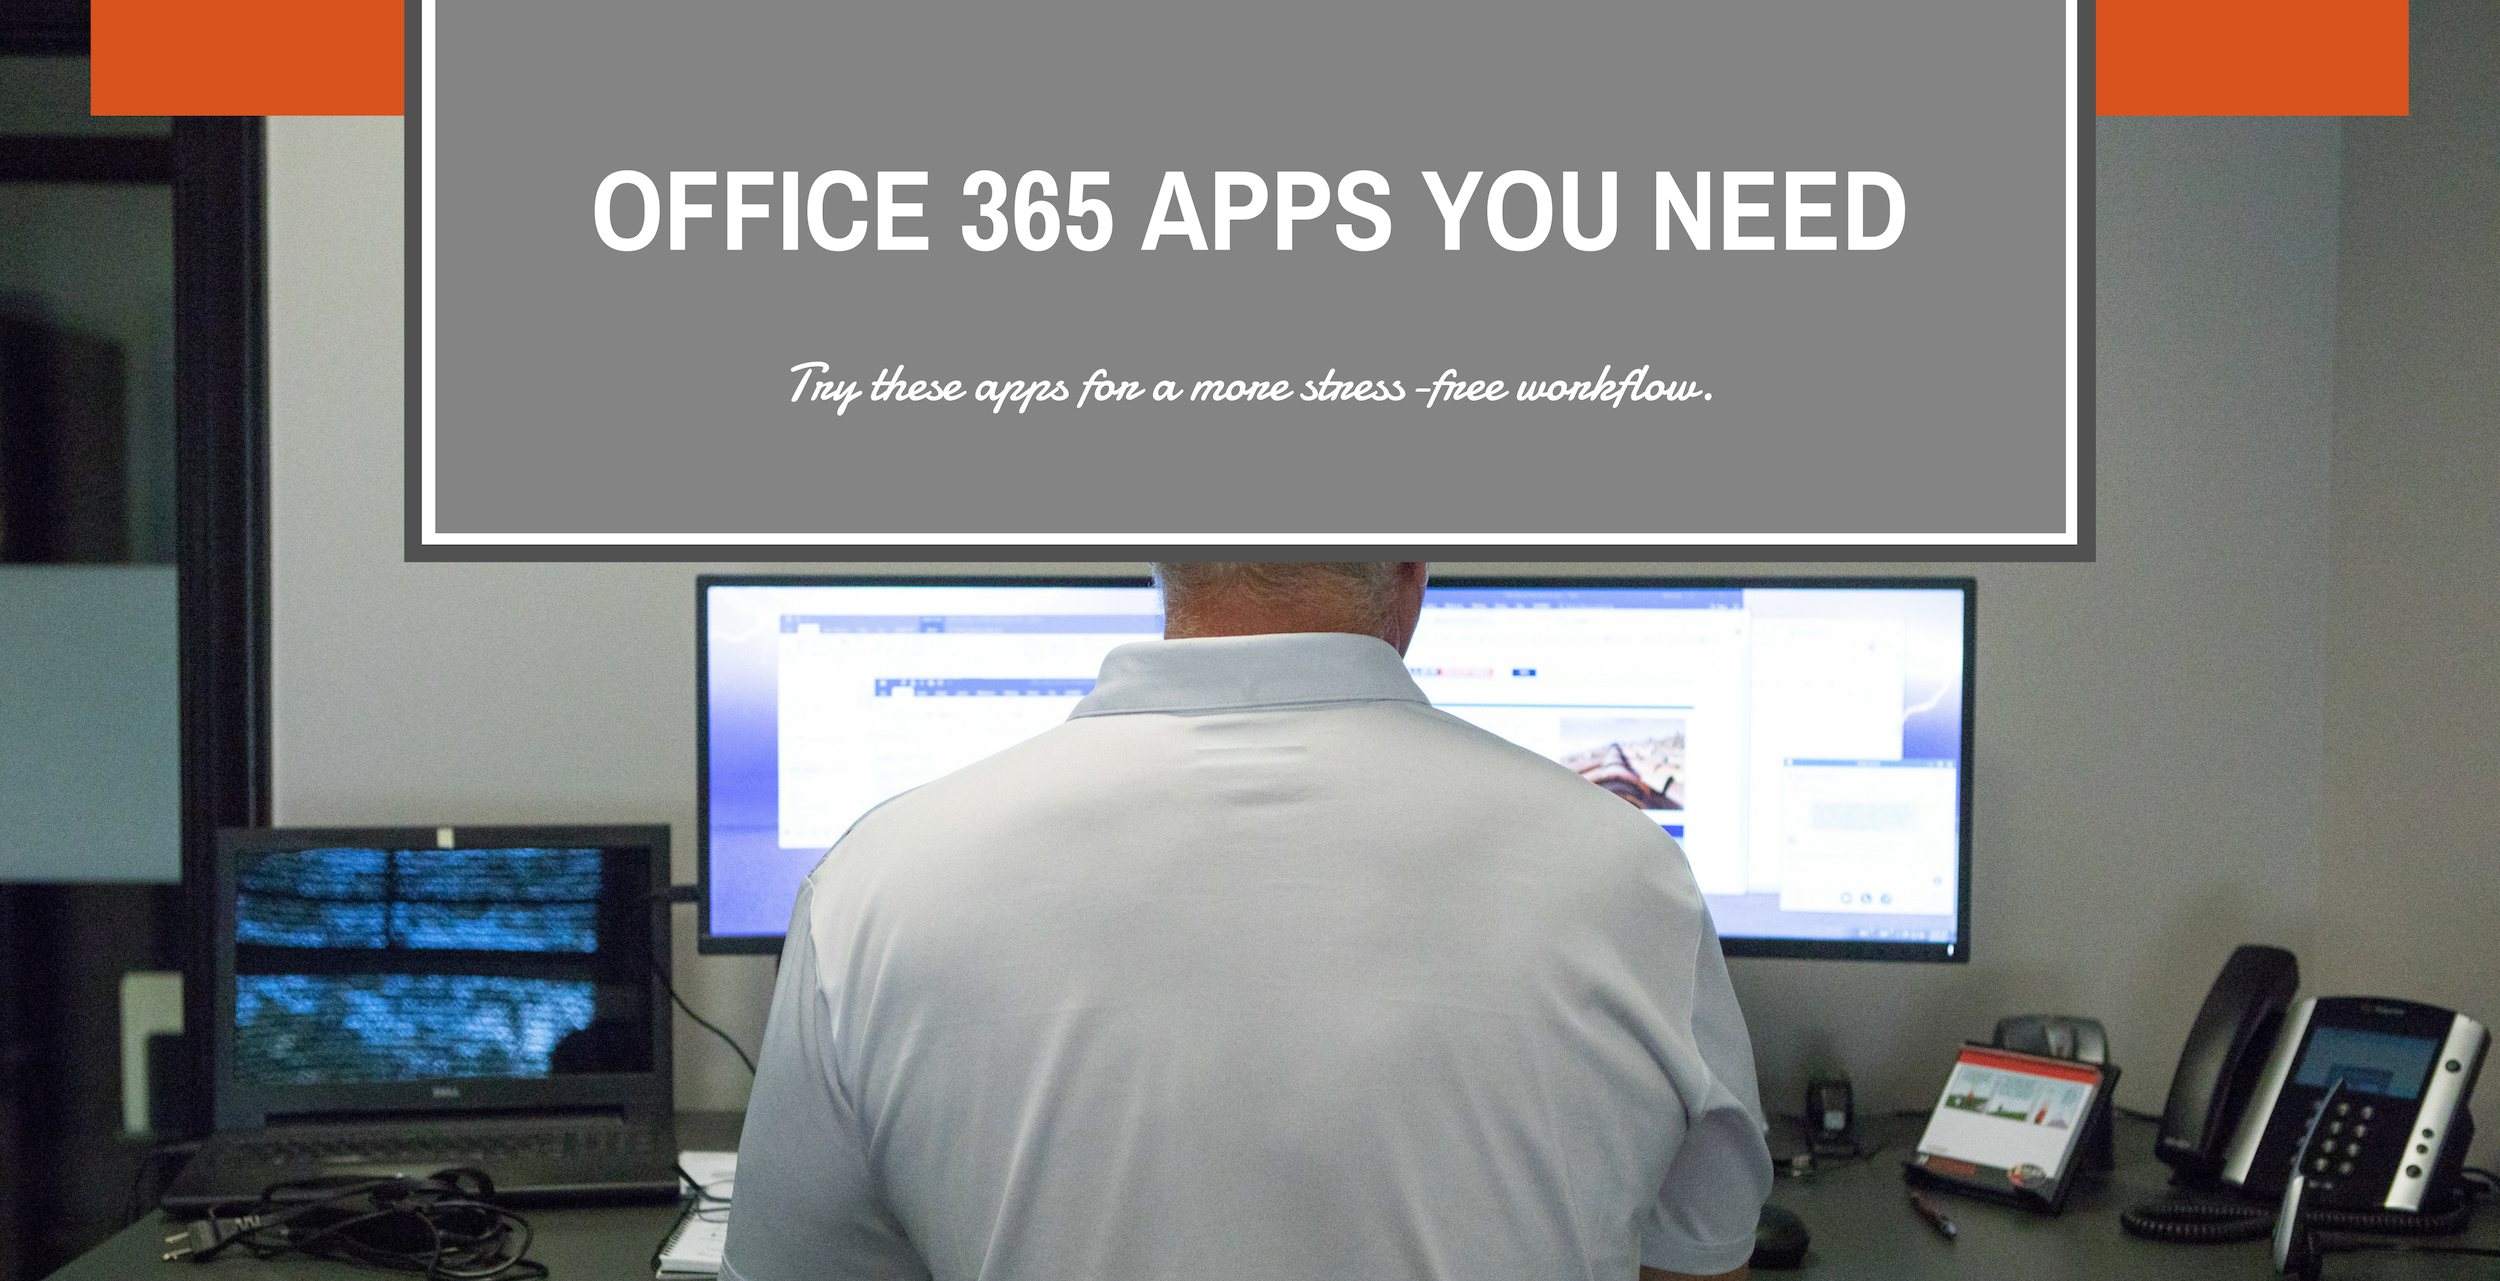 Office 365 Apps to use